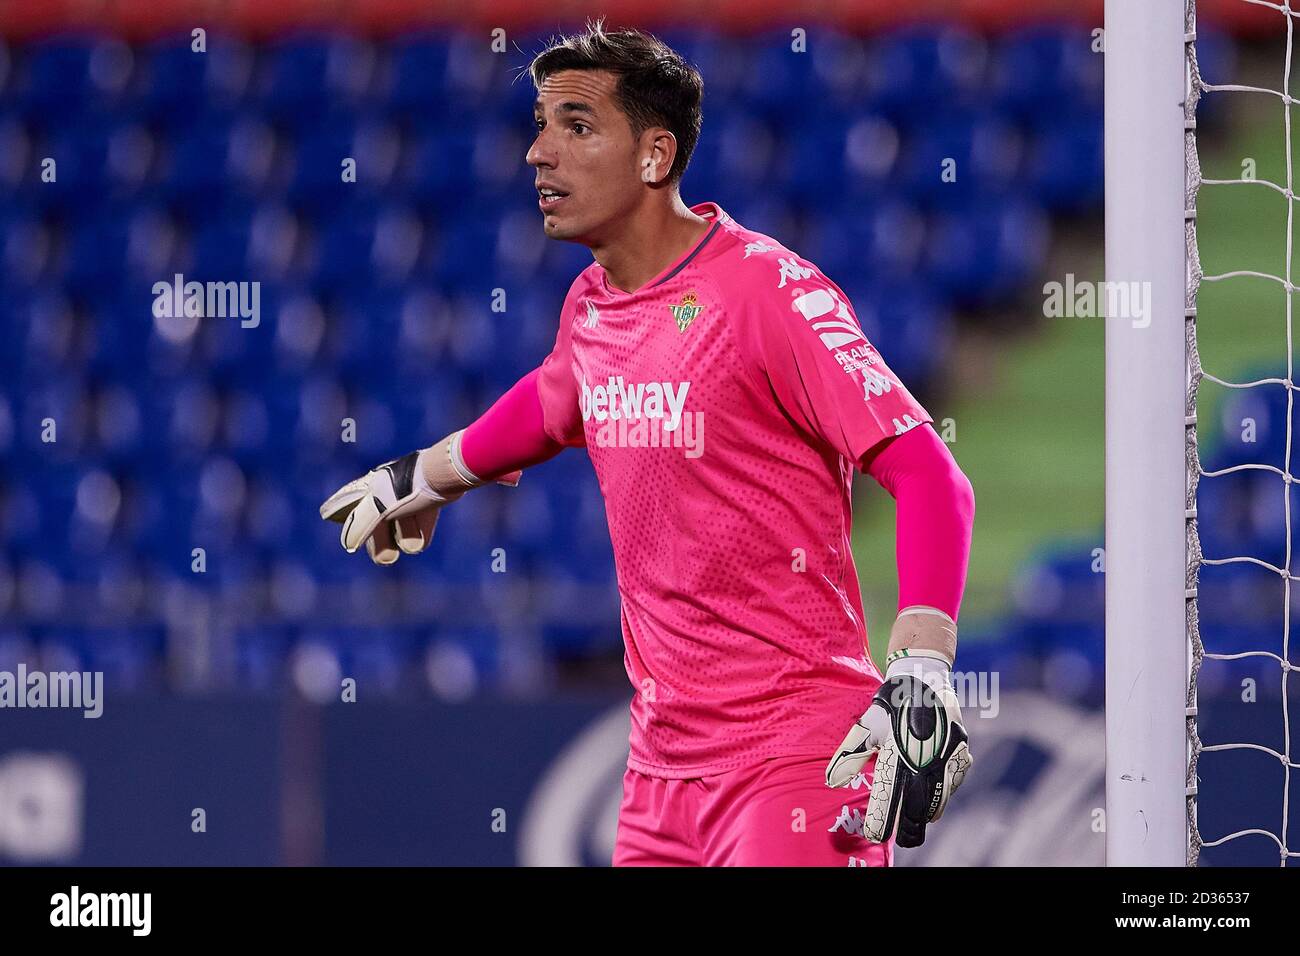 Getafe, Spain. 29th Sep, 2020. Joel Robles of Real Betis during the La Liga match between Getafe CF and Real Betis played at Coliseum Alfonso Perez Stadium on September 29, 2020 in Getafe, Spain. (Photo by Ruben Albarran/PRESSINPHOTO) Credit: Pro Shots/Alamy Live News Stock Photo